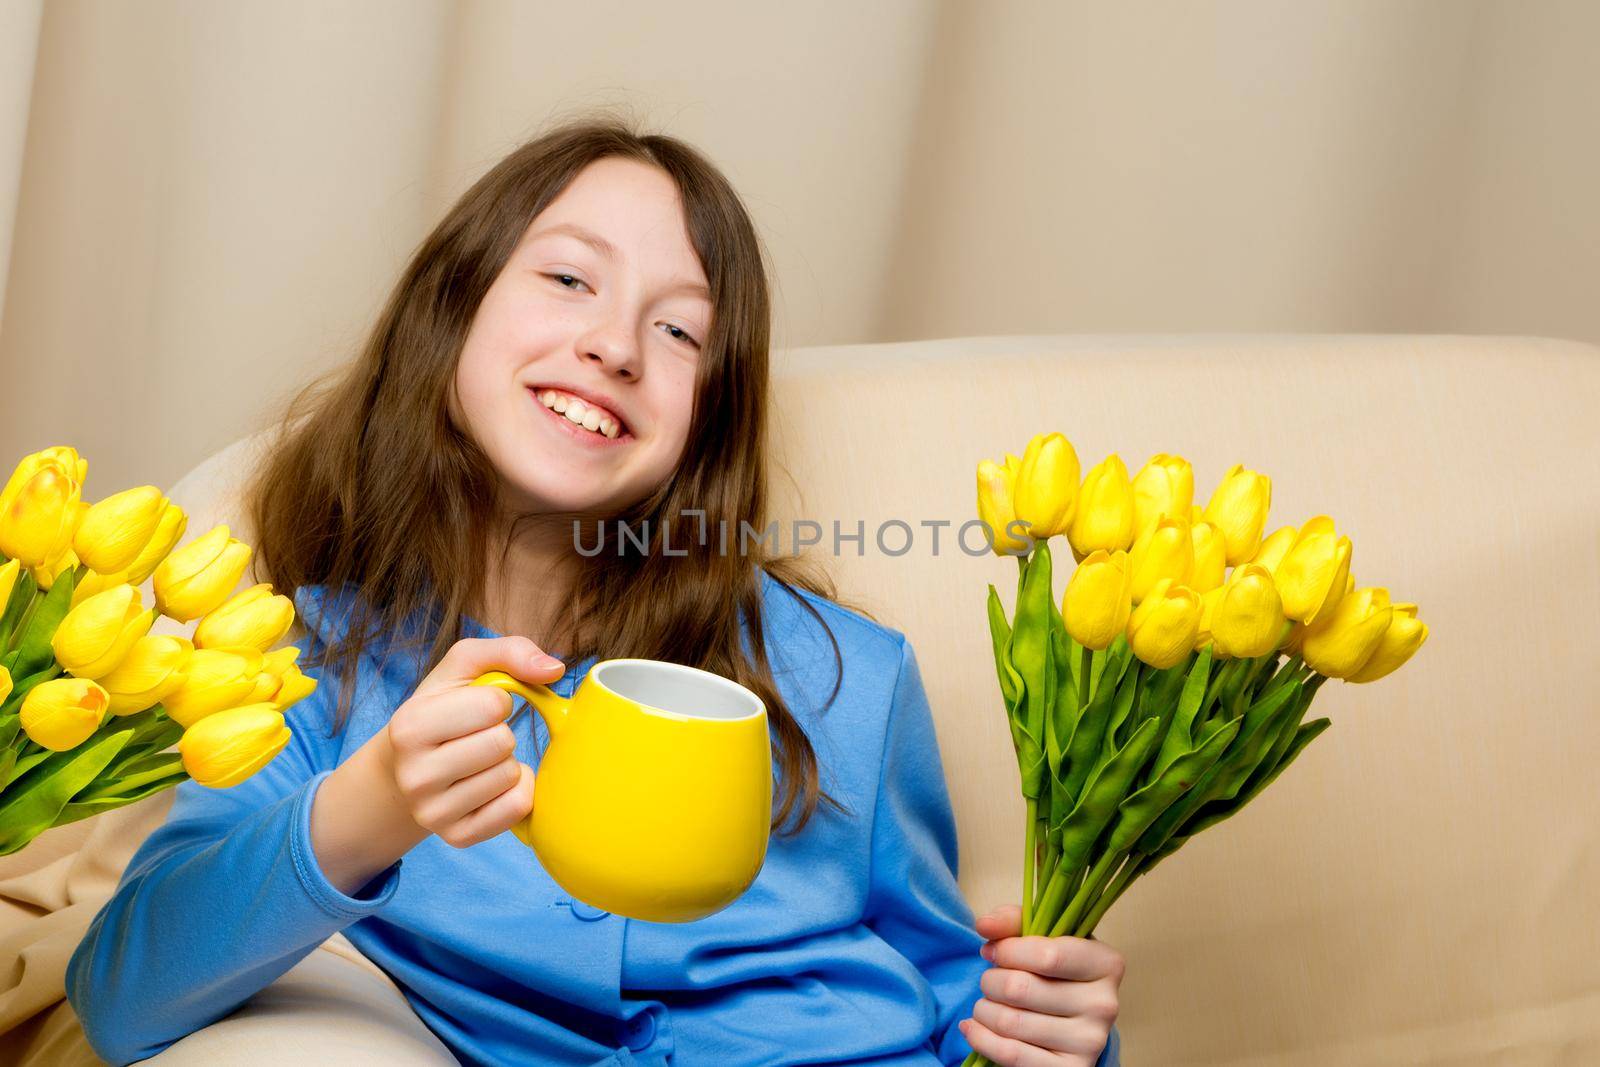 A charming school girl is sitting on the couch with a mug in her hands. Concept of happy people, healthy eating.